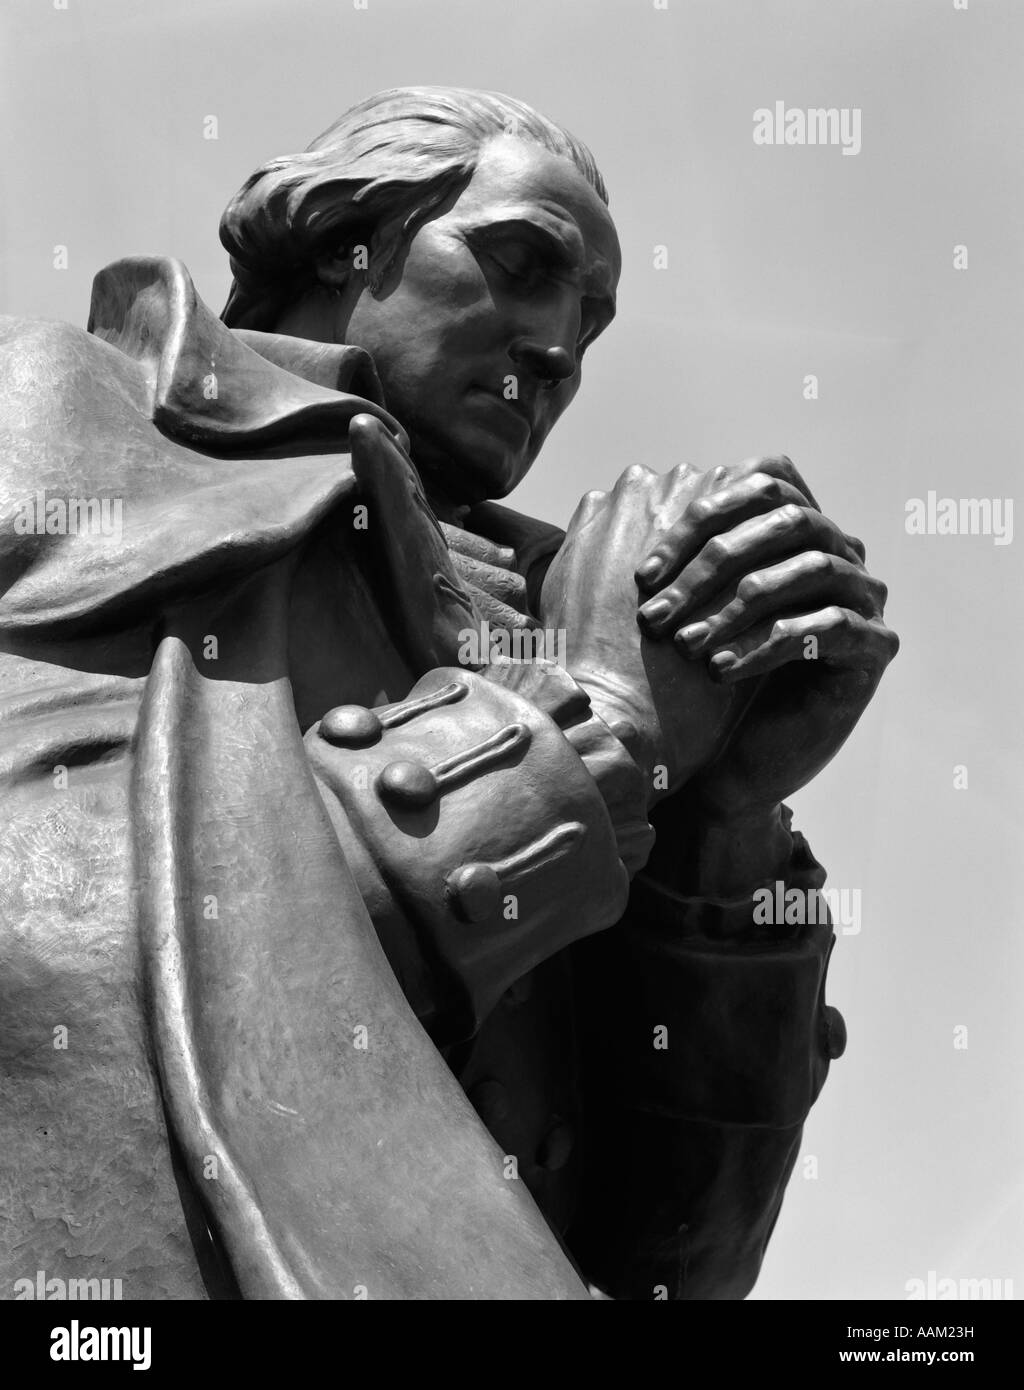 BRONZE STATUE OF GEORGE WASHINGTON FIRST AMERICAN PRESIDENT OF UNITED STATES KNEELING IN PRAYER Stock Photo